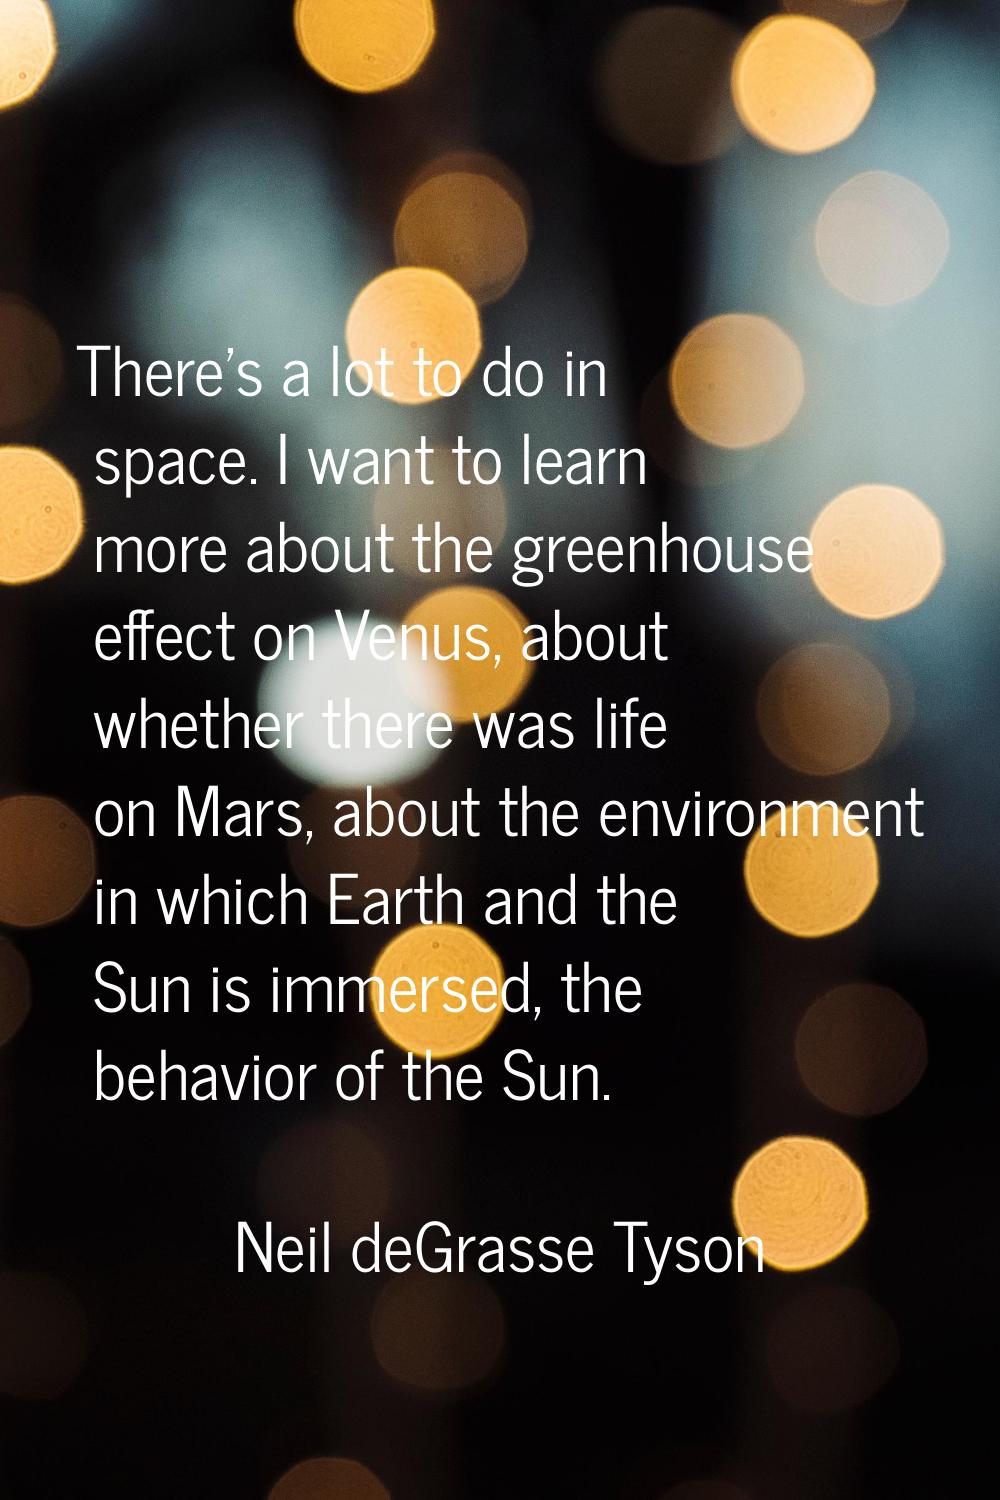 There's a lot to do in space. I want to learn more about the greenhouse effect on Venus, about whet